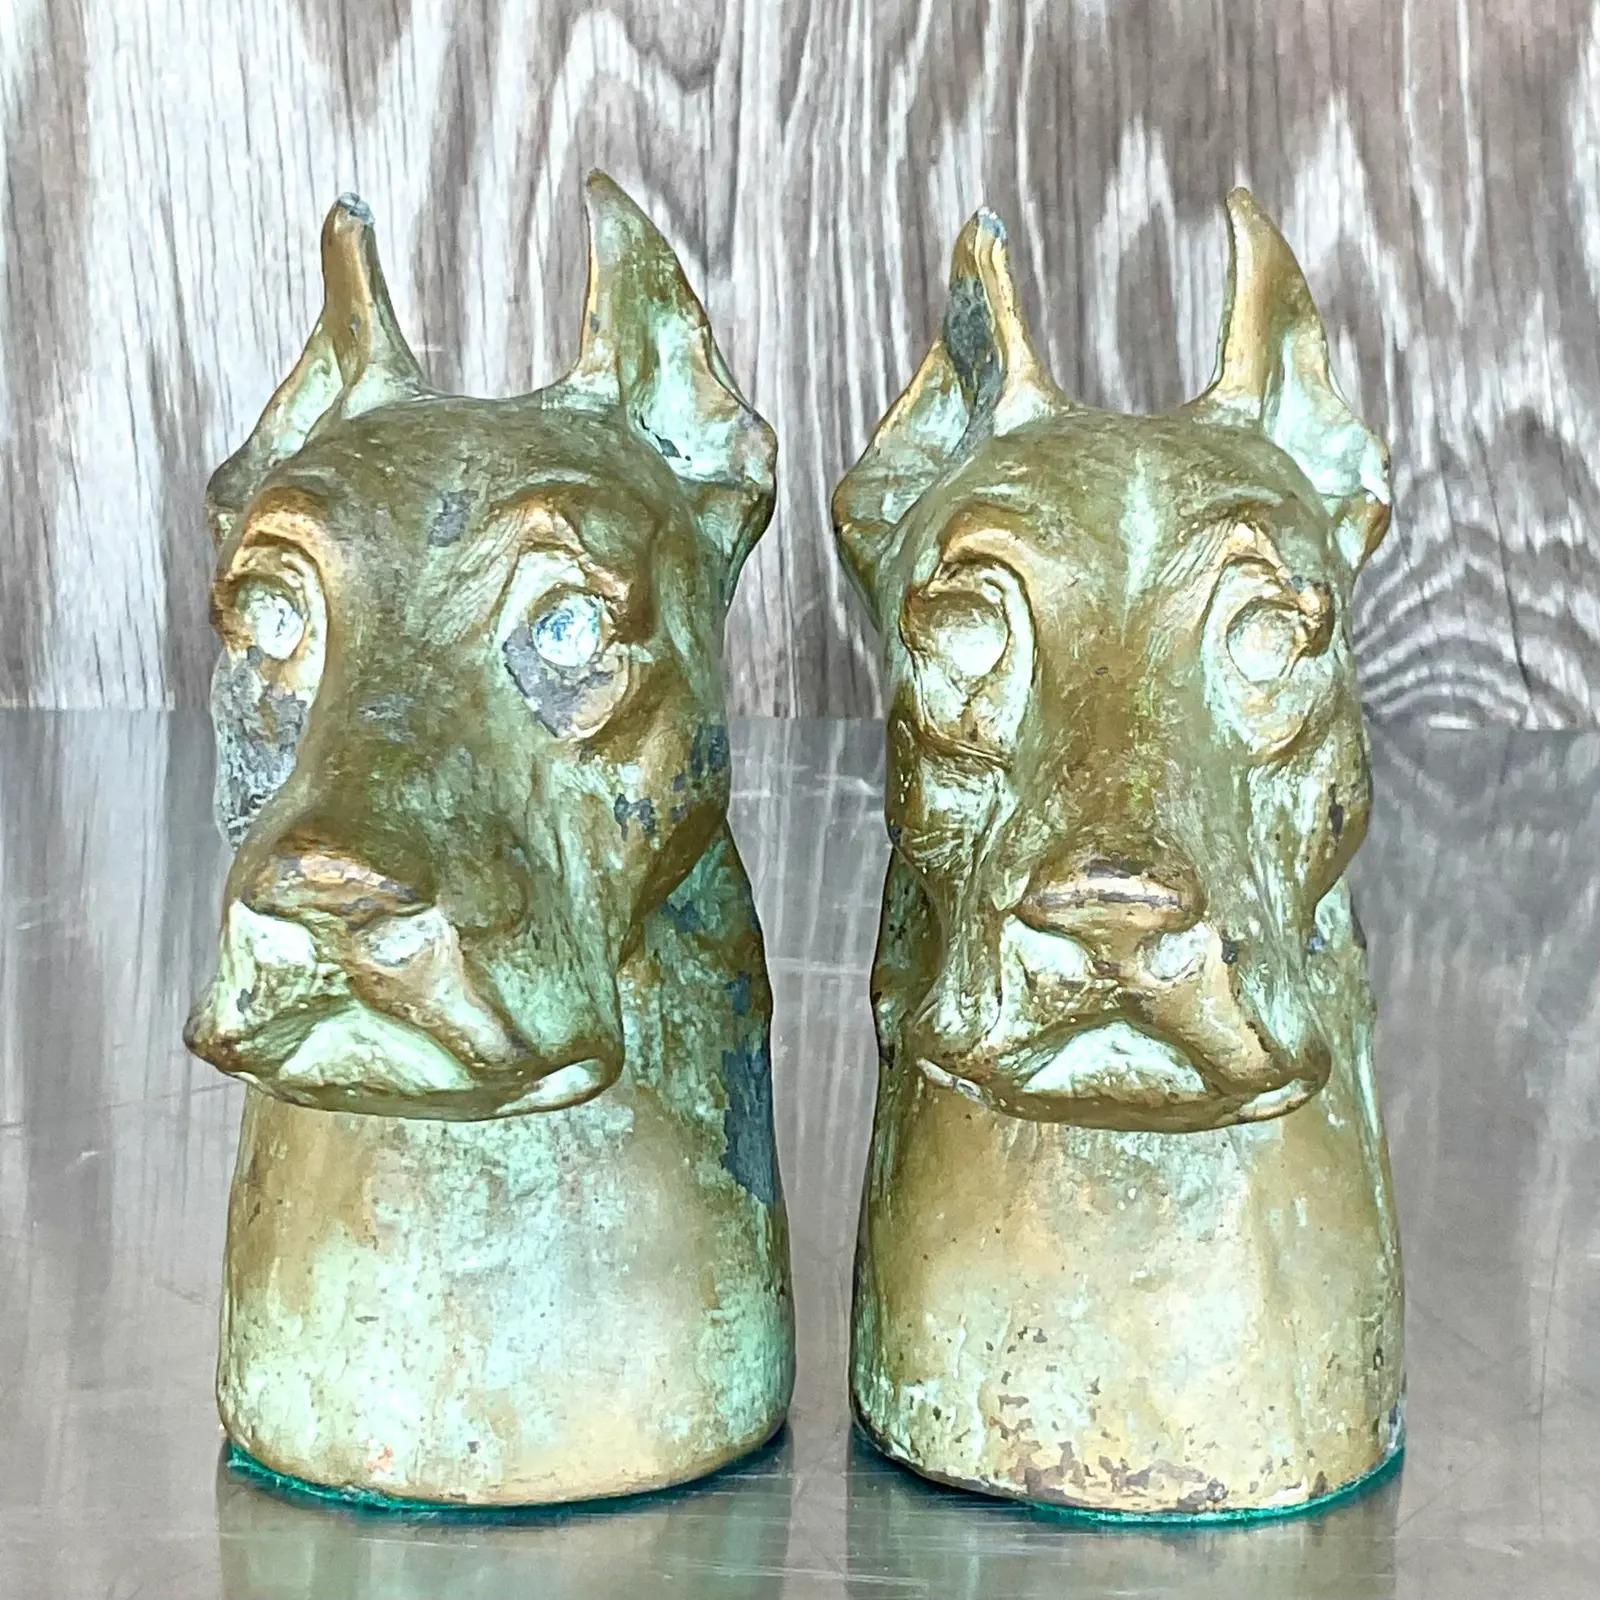 Fantastic vintage Boho great fane bookends. Cast metal with a patinated finish. Made by the iconic McClelland Barclay and signed on the back. Acquired from a Palm Beach estate

The bookends are in great vintage condition. Minor scuffs and